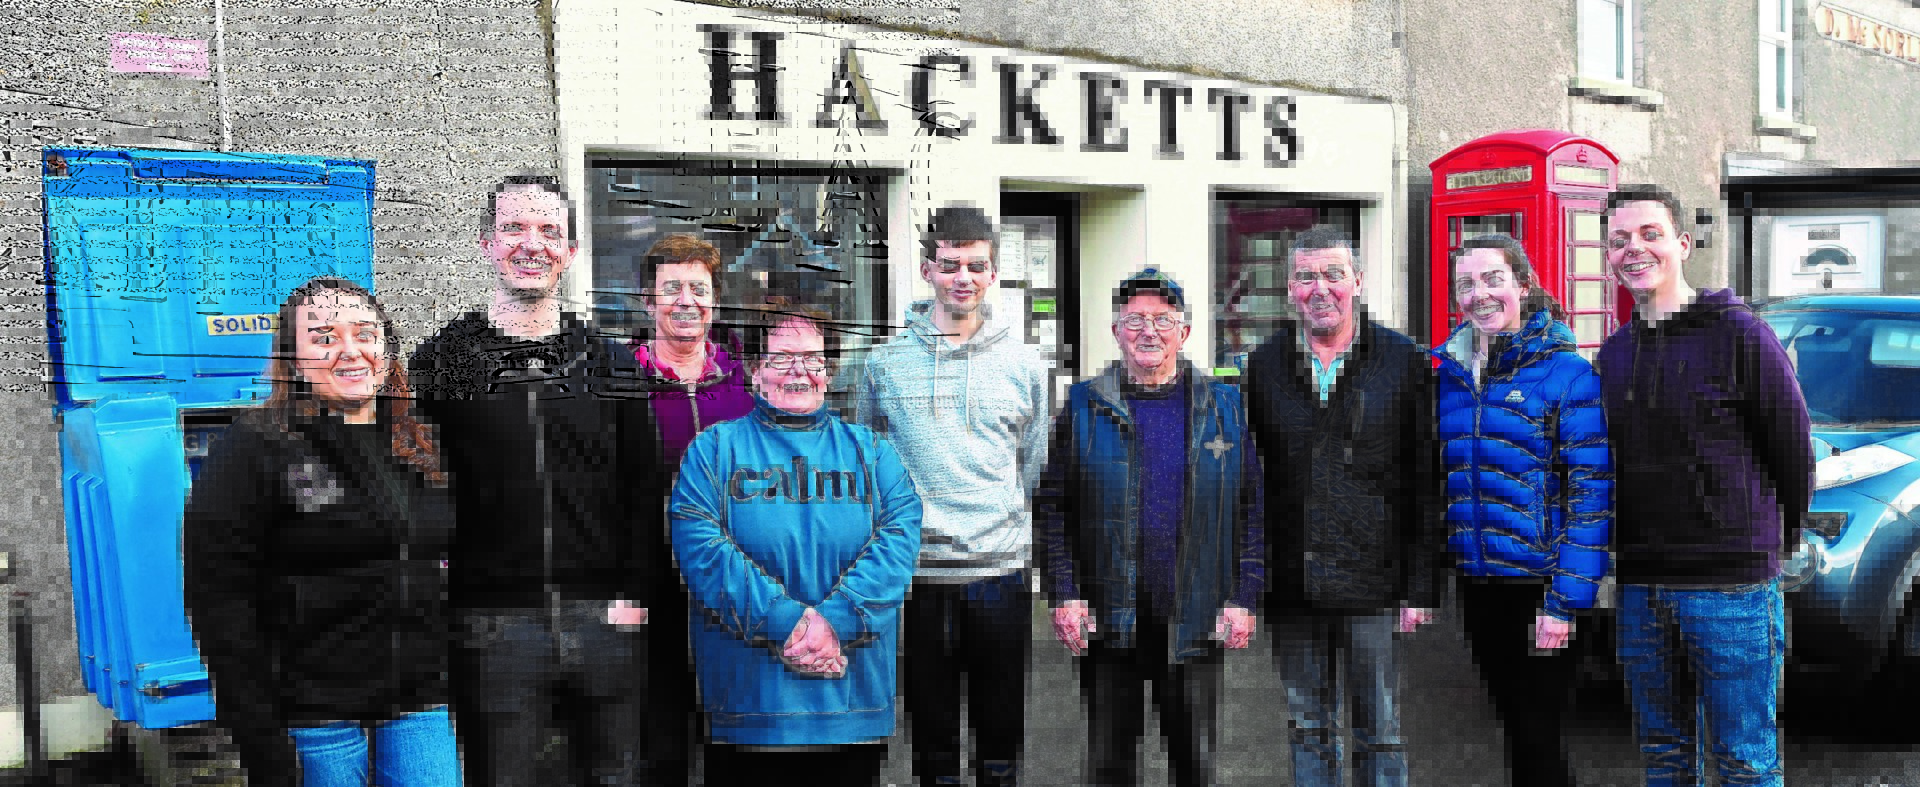 Family firm closes doors after 100 years in business